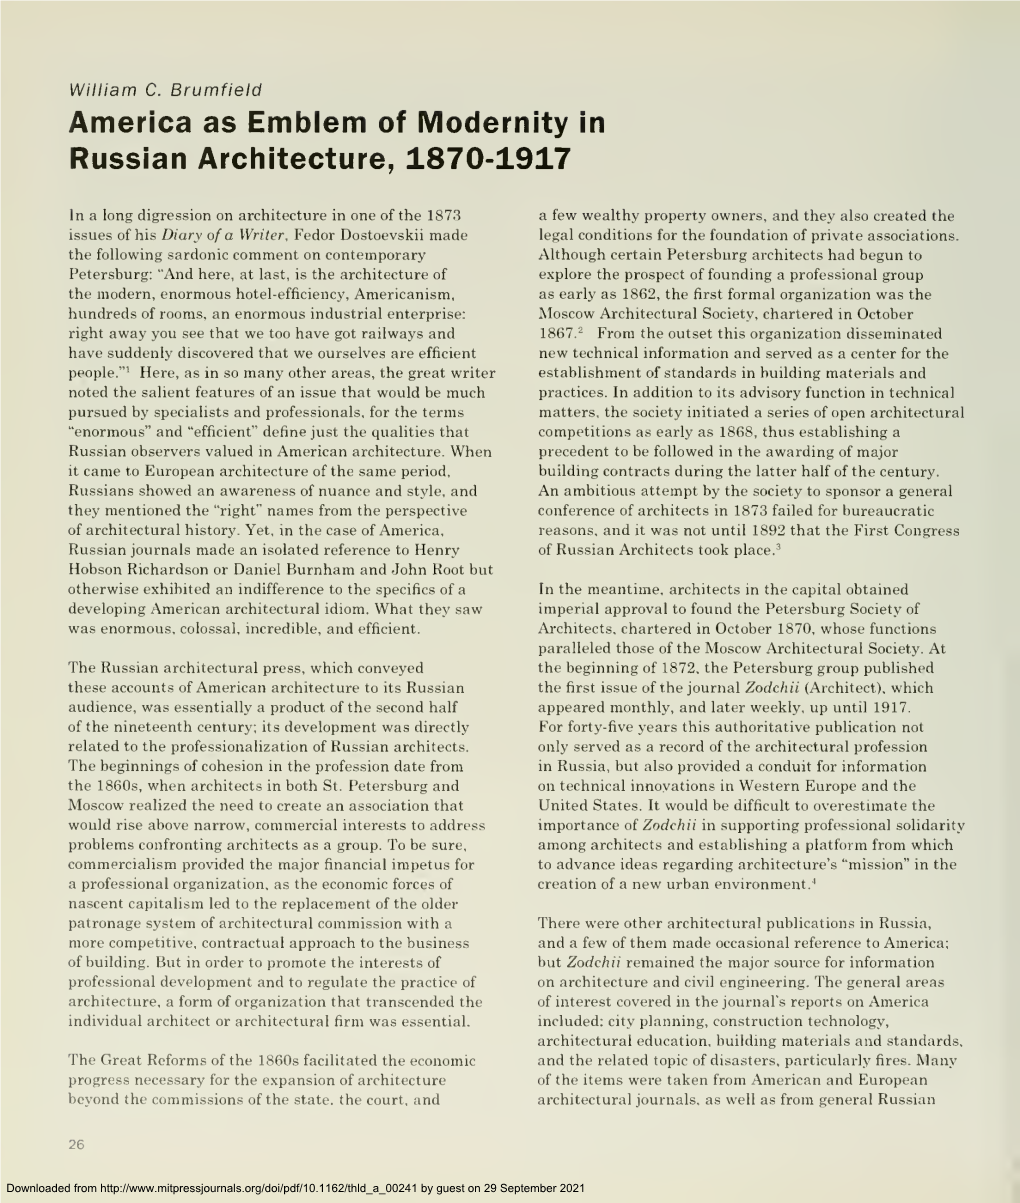 America As Emblem of Modernity in Russian Architecture, 1870-1917